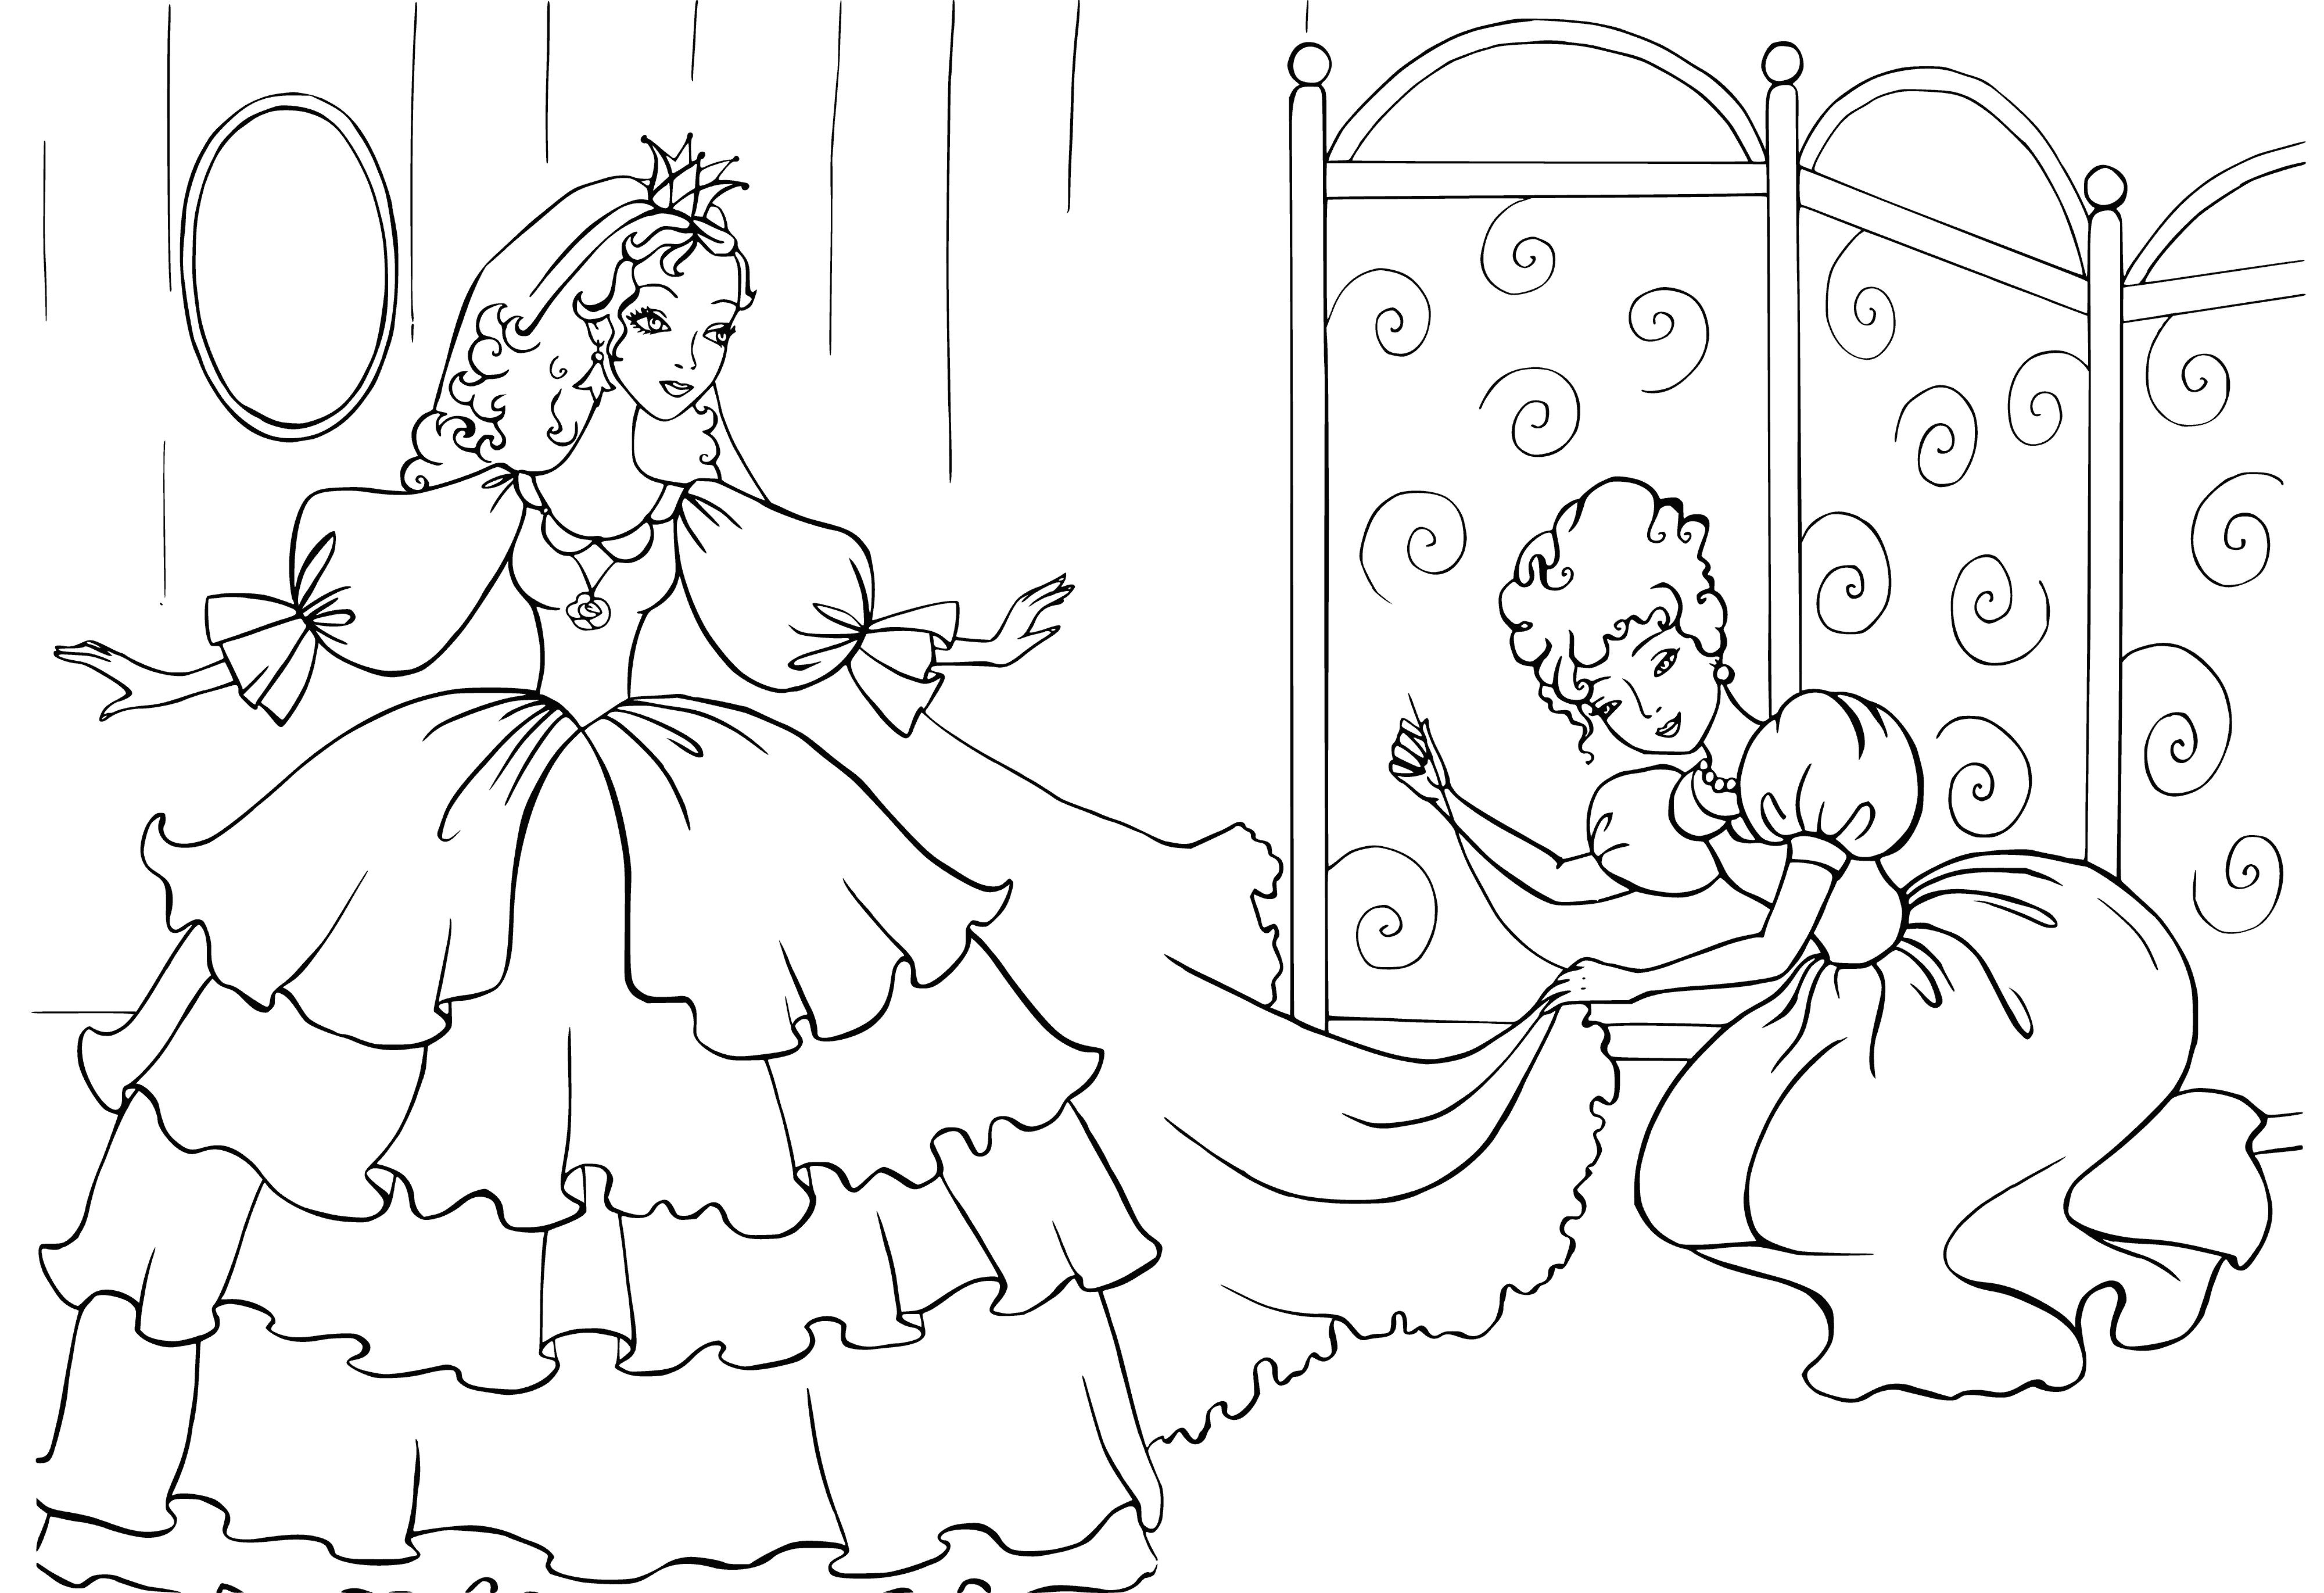 coloring page: Princess looks ready for a ball in beautiful strapless dress with sweetheart neck, crystals, and full skirt.